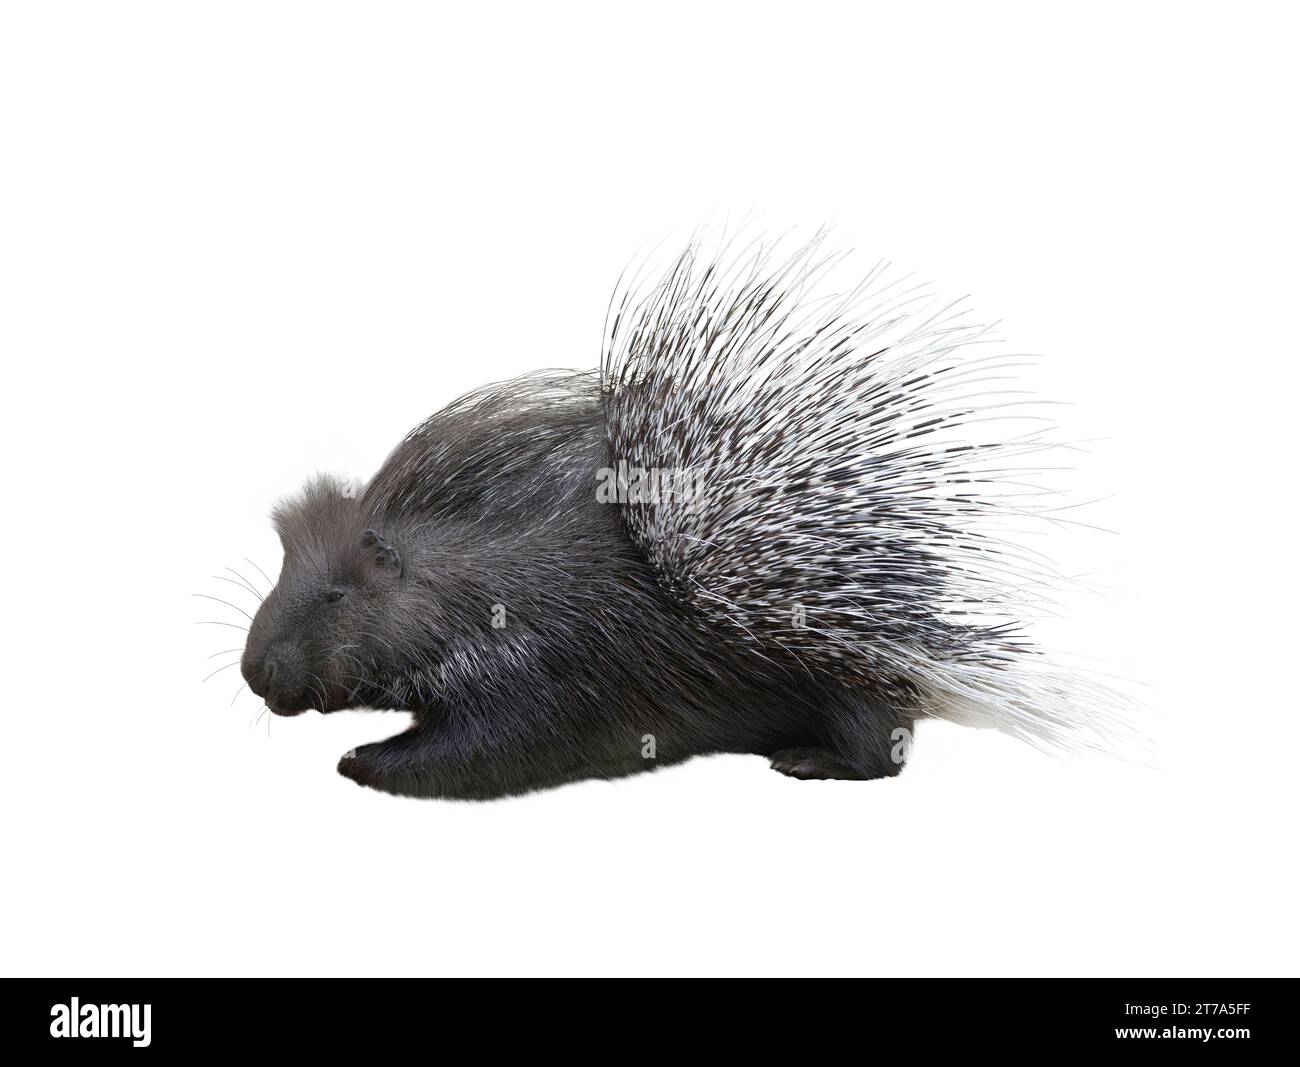 https://c8.alamy.com/comp/2T7A5FF/porcupine-isolated-on-white-background-2T7A5FF.jpg